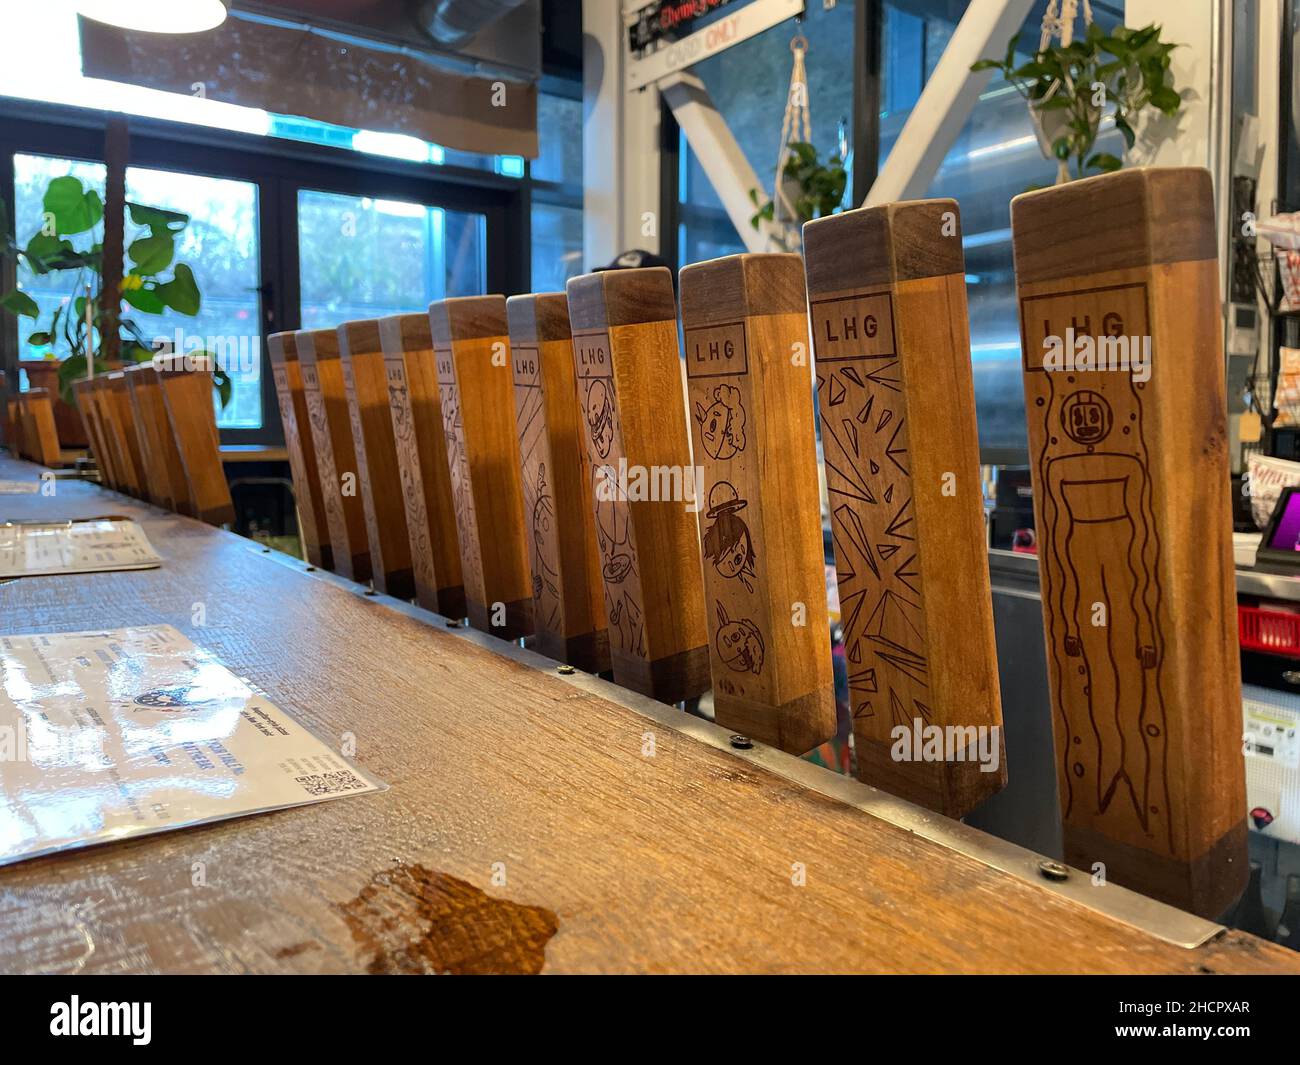 A row of wooden beer pump handles for dispensing ale at the 'left handed giant' brew pub in Bristol.UK Stock Photo